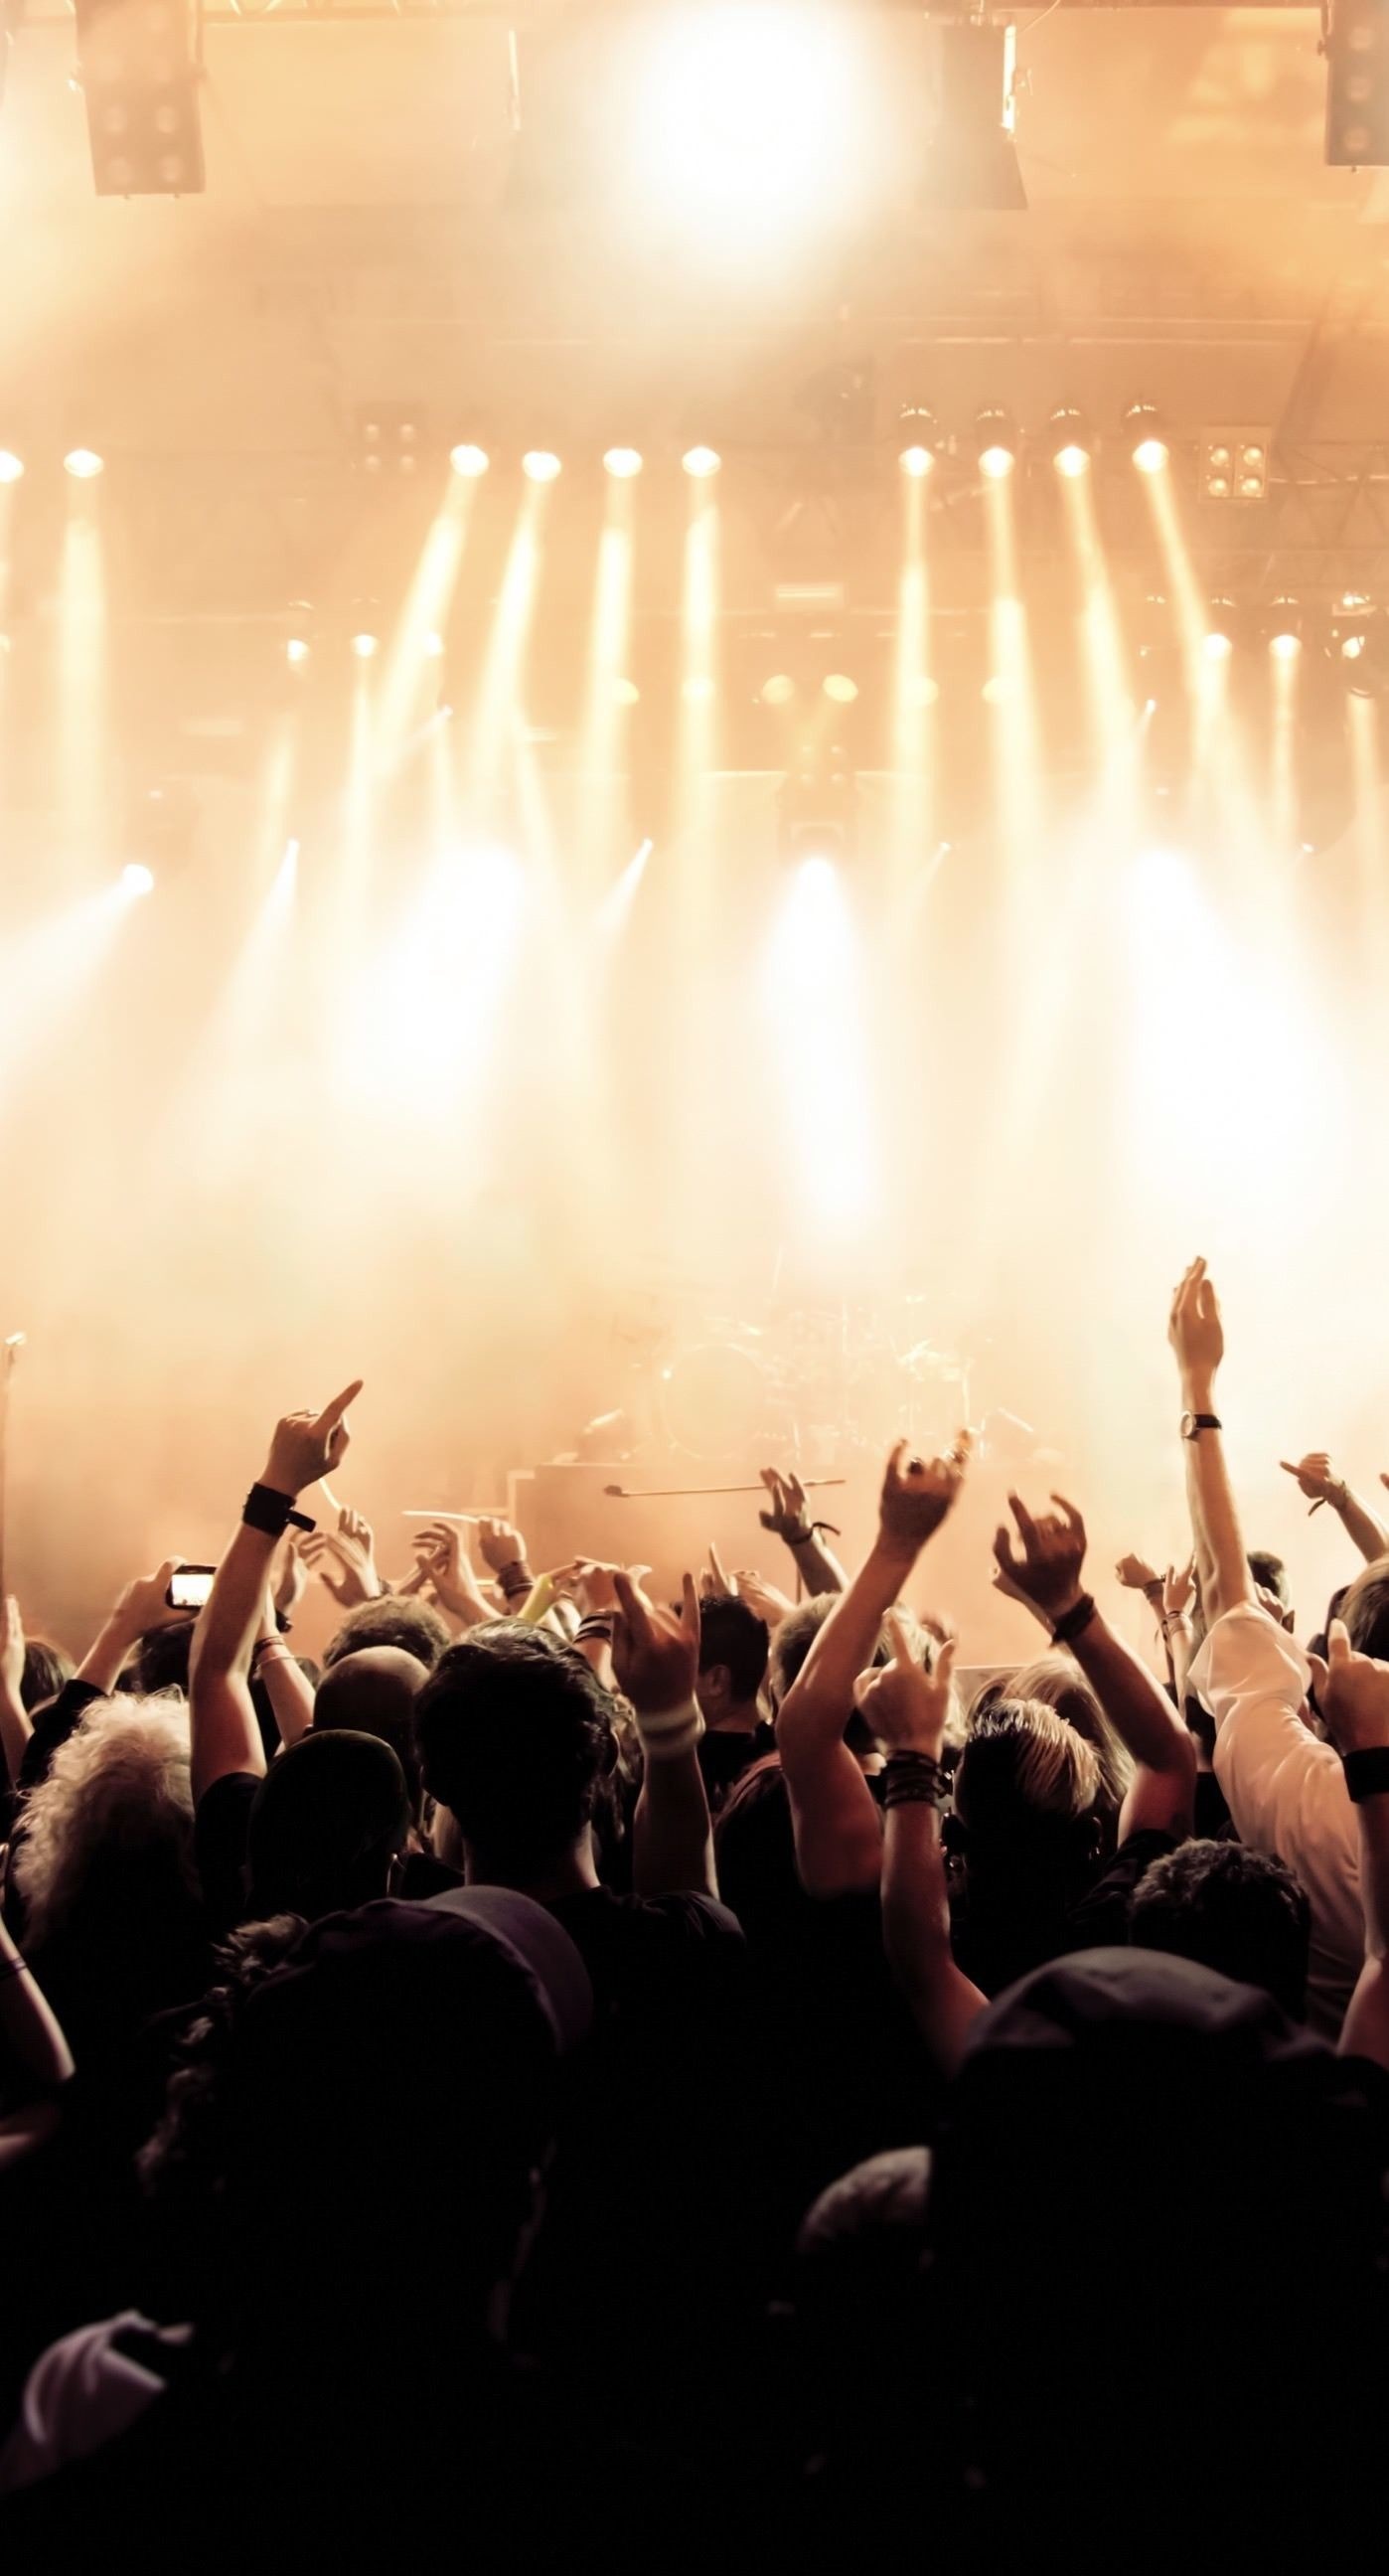 Concert: Crowded music hall, People waving hands, Light effects. 1400x2600 HD Wallpaper.